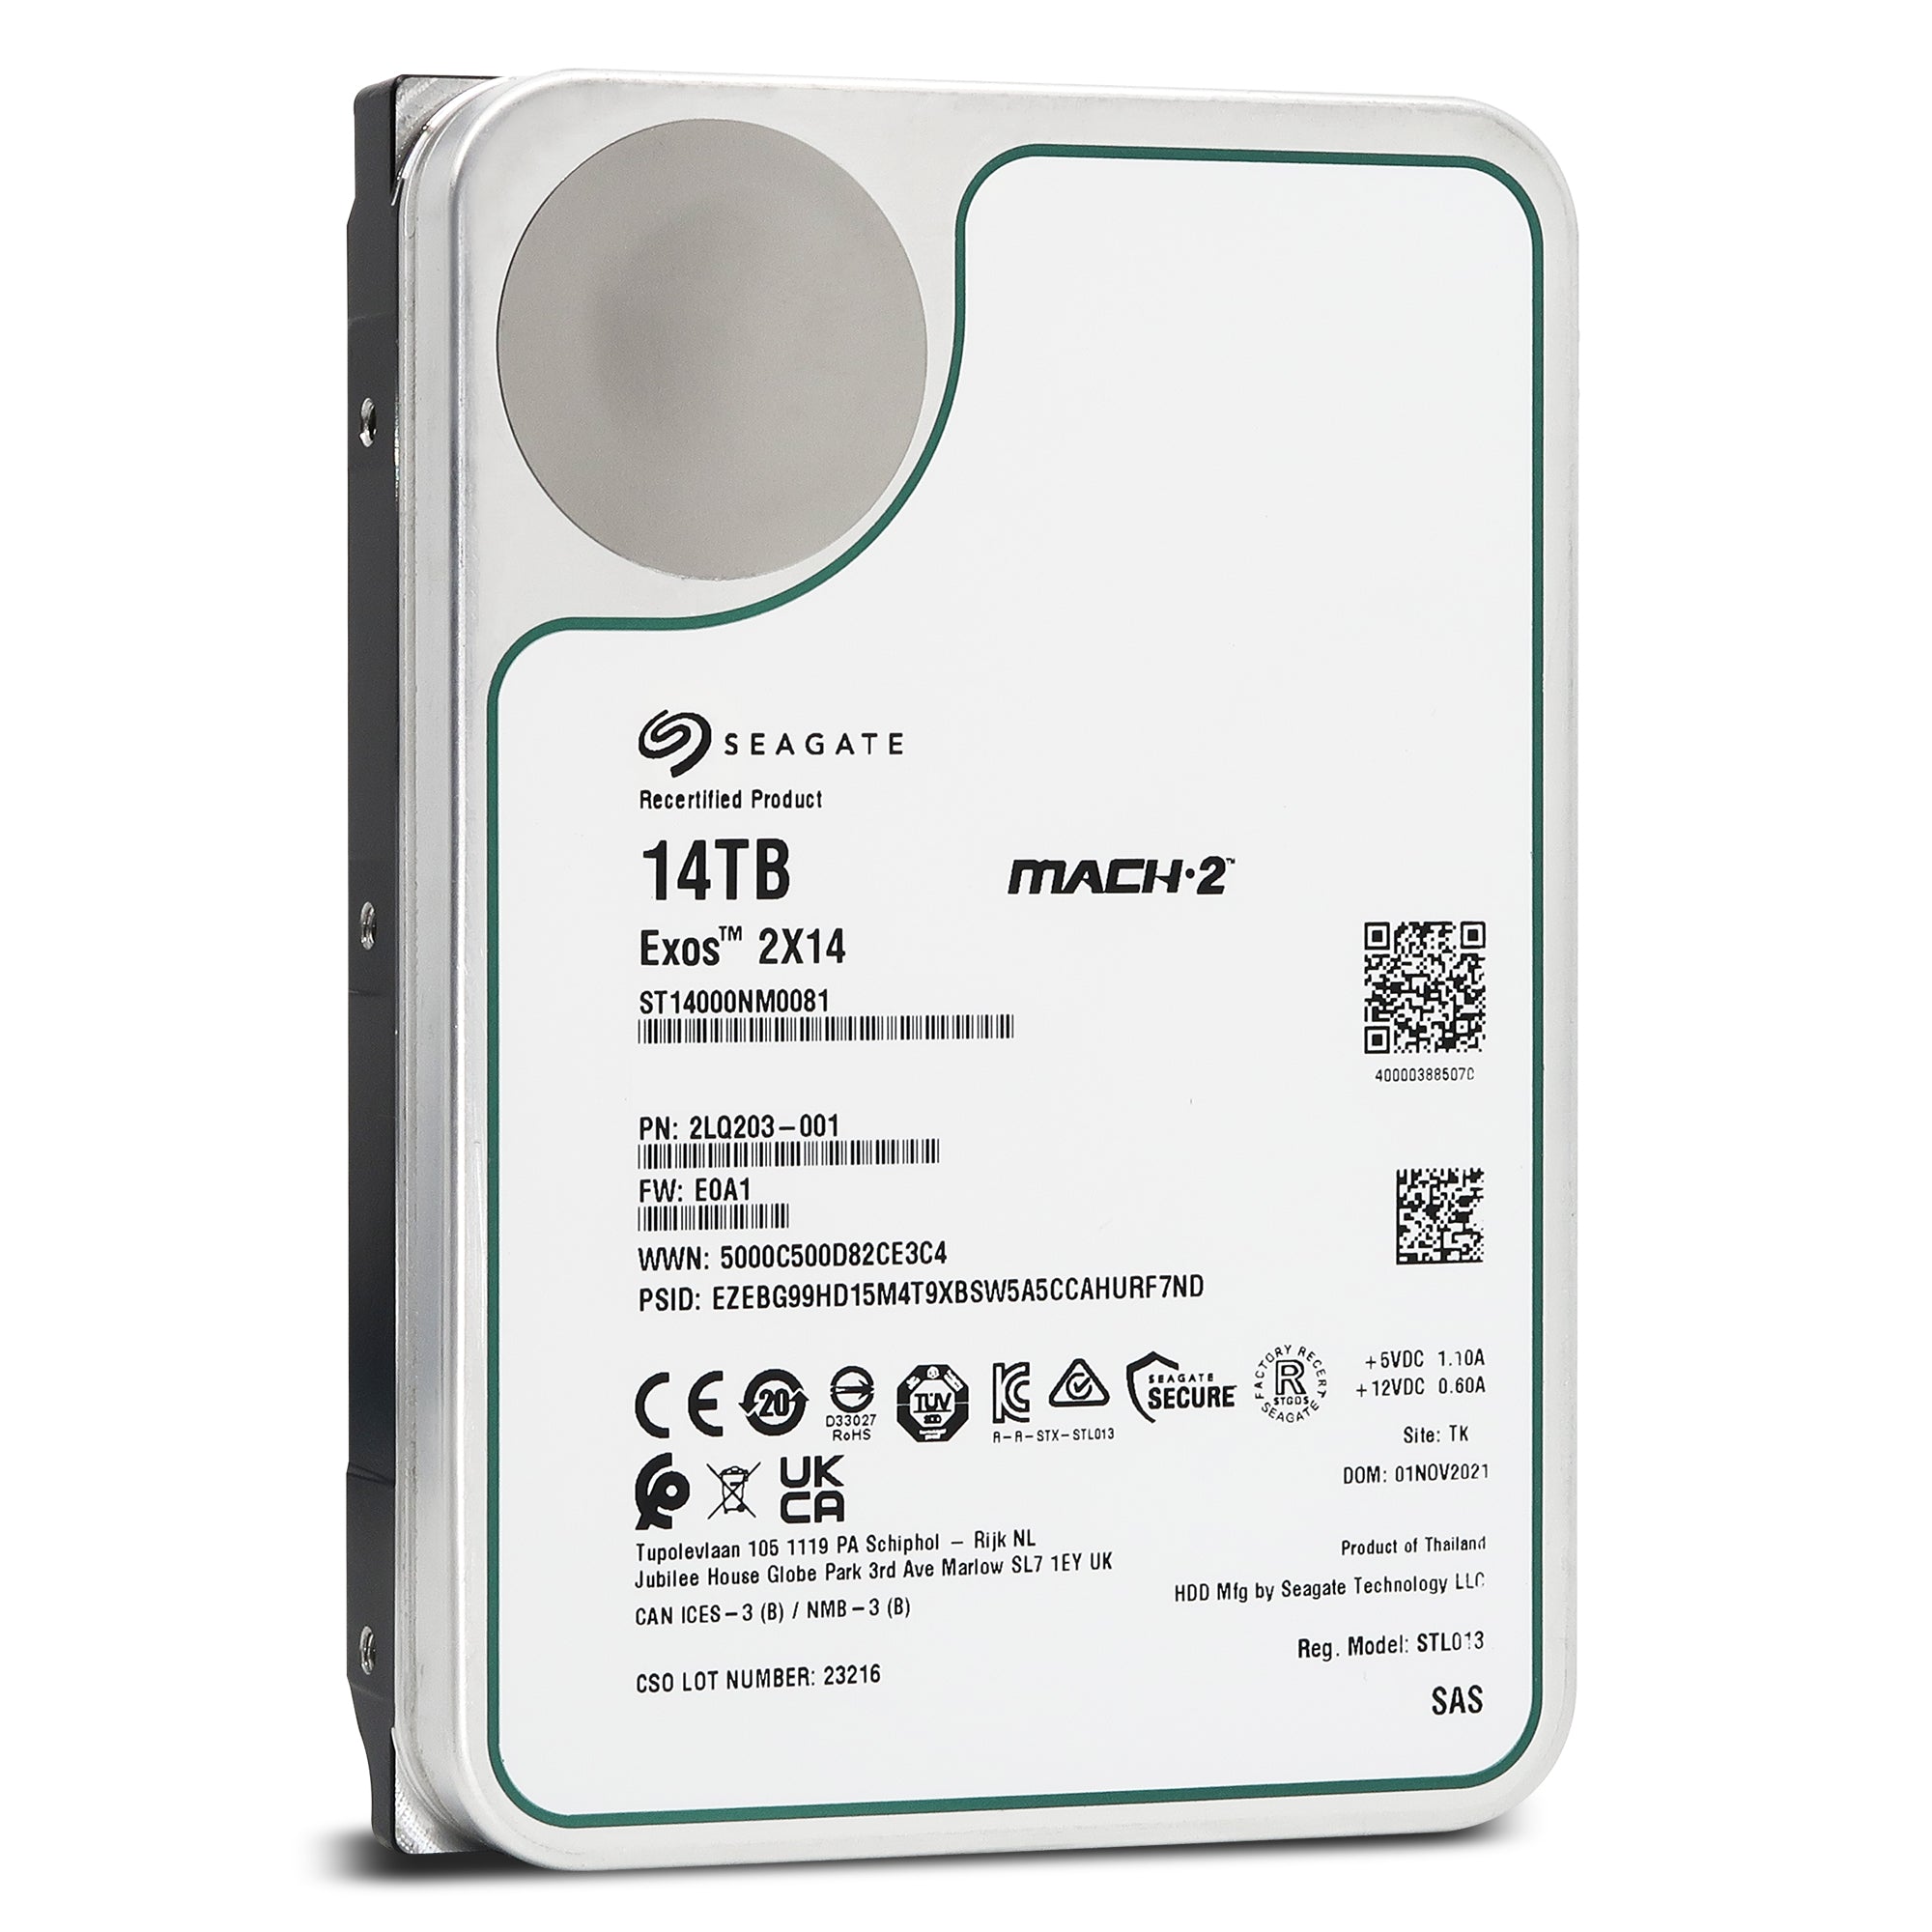 Seagate Exos 2X14 ST14000NM0081 2LQ203-001 14TB (2x 7TB) 7.2K RPM SAS 12Gb/s 512e MACH.2 3.5in Recertified Hard Drive - Front View